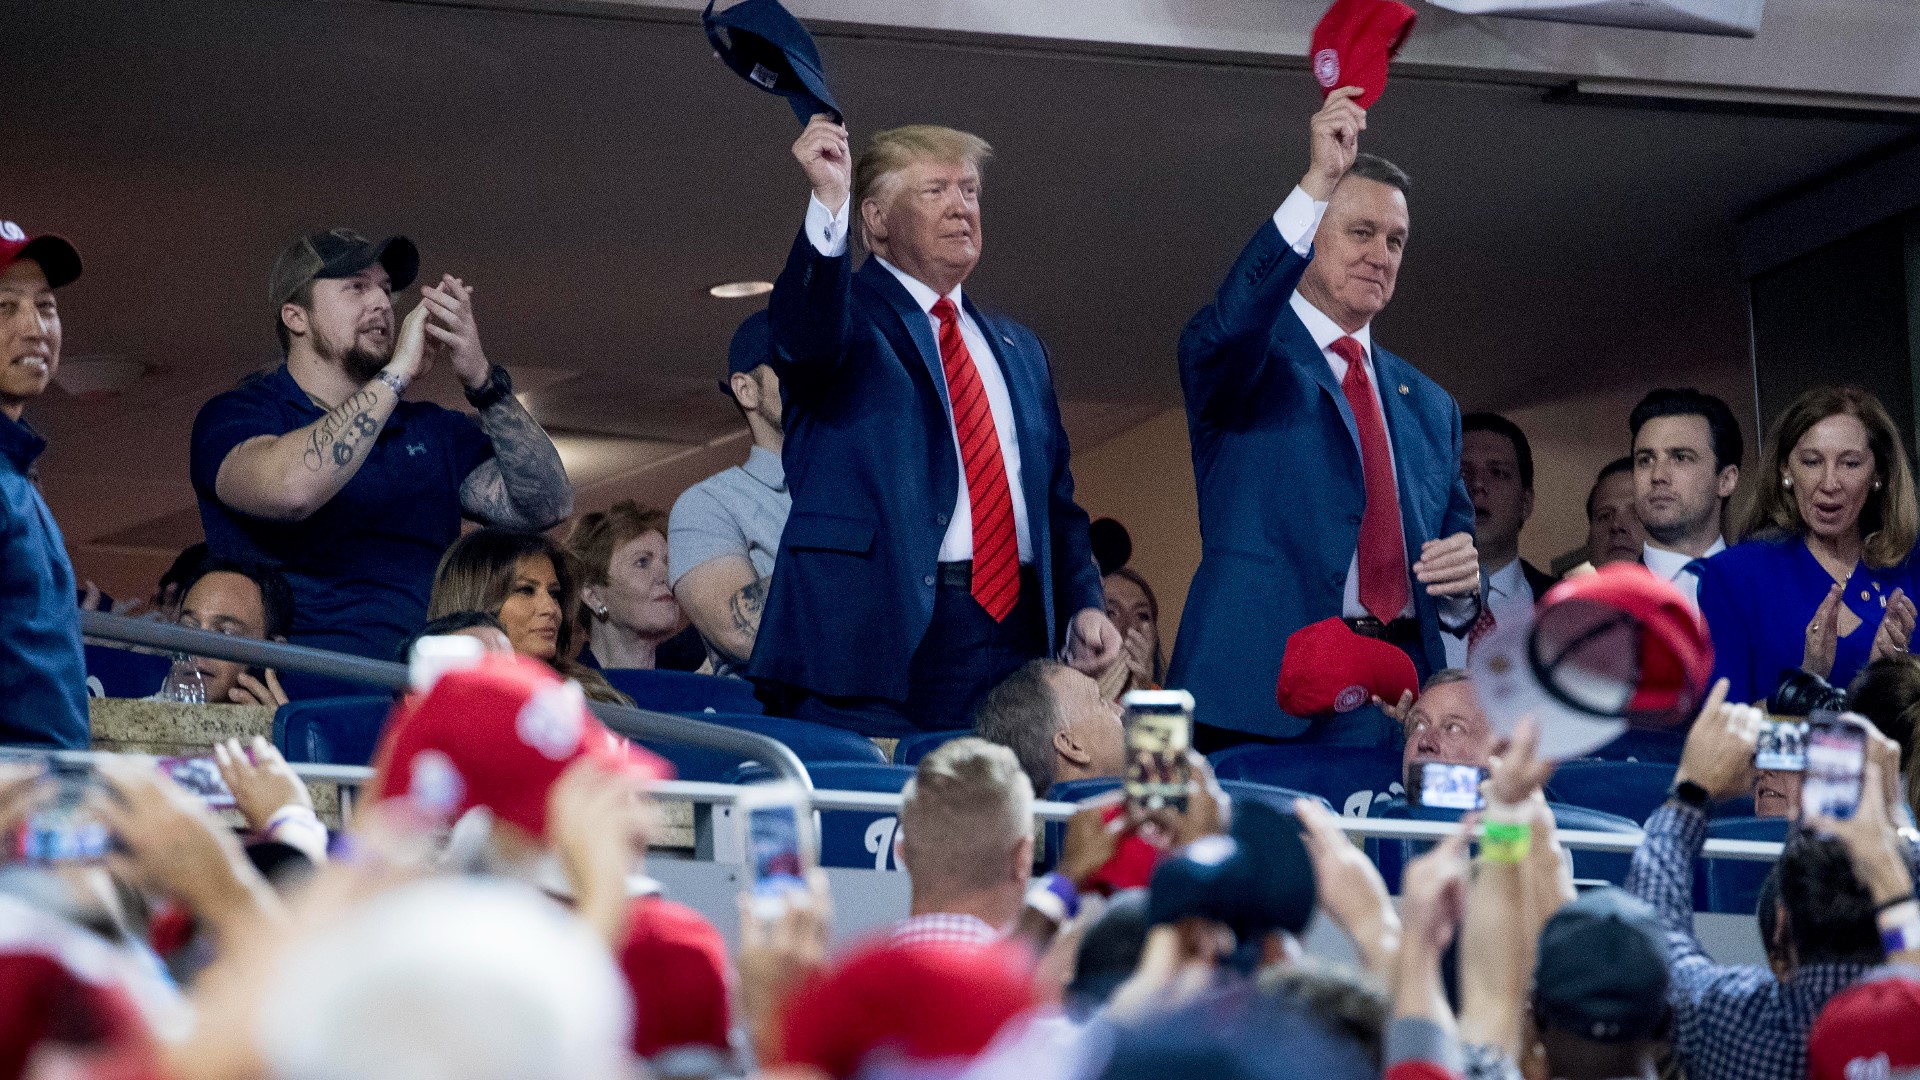 Former President Donald Trump is set to attend Game 4 of the World Series this weekend in Atlanta, having requested tickets through the league.